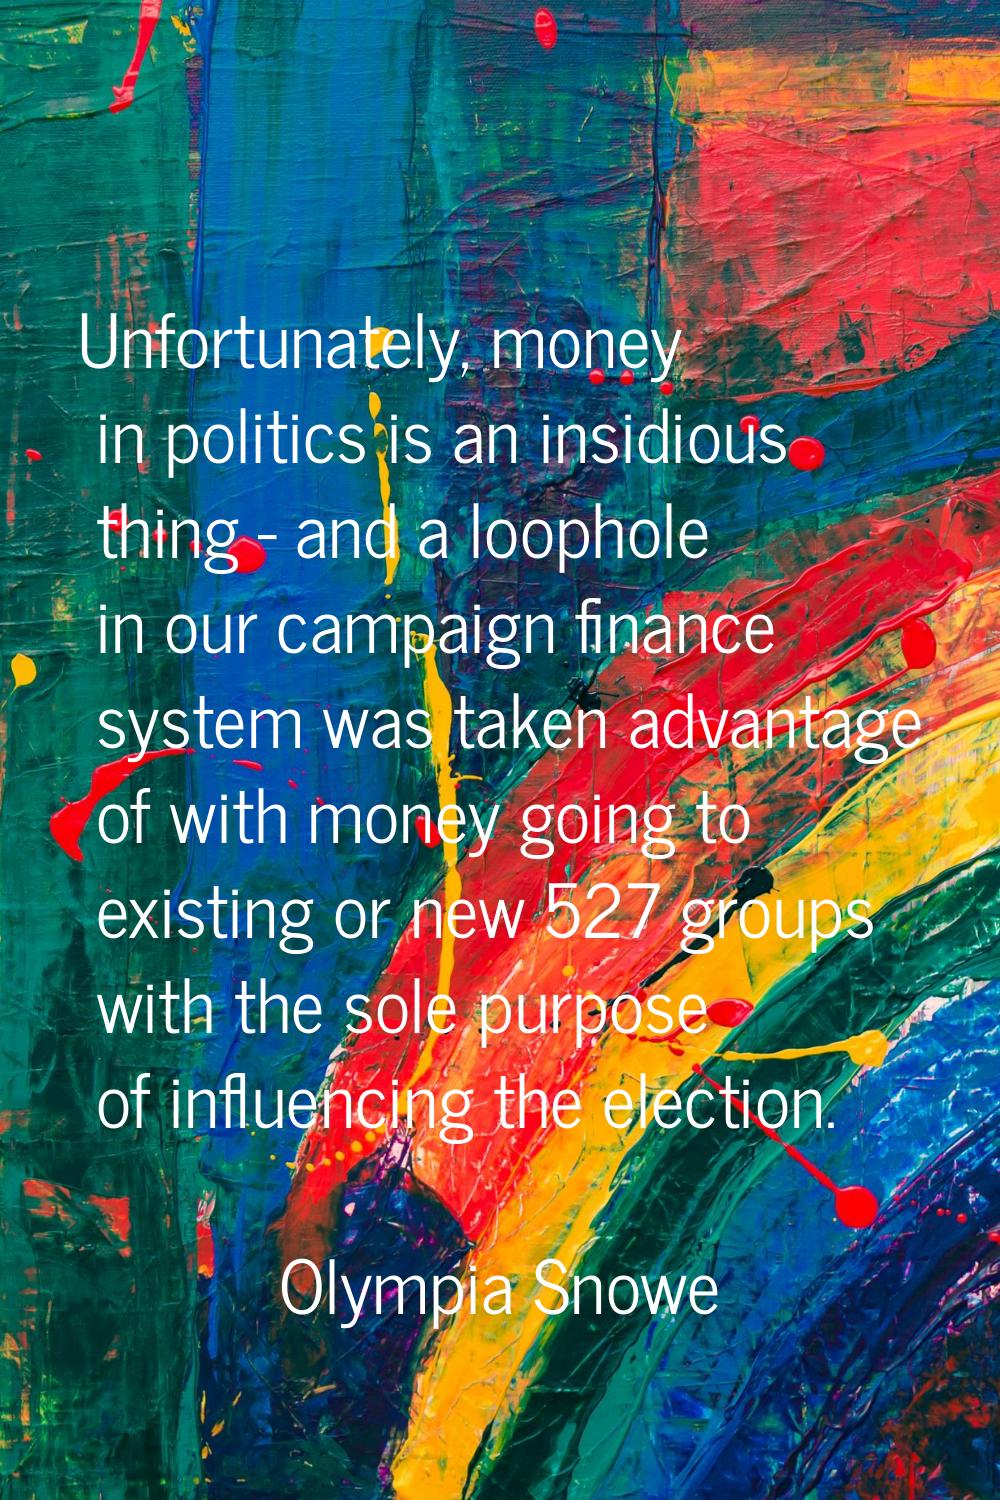 Unfortunately, money in politics is an insidious thing - and a loophole in our campaign finance sys